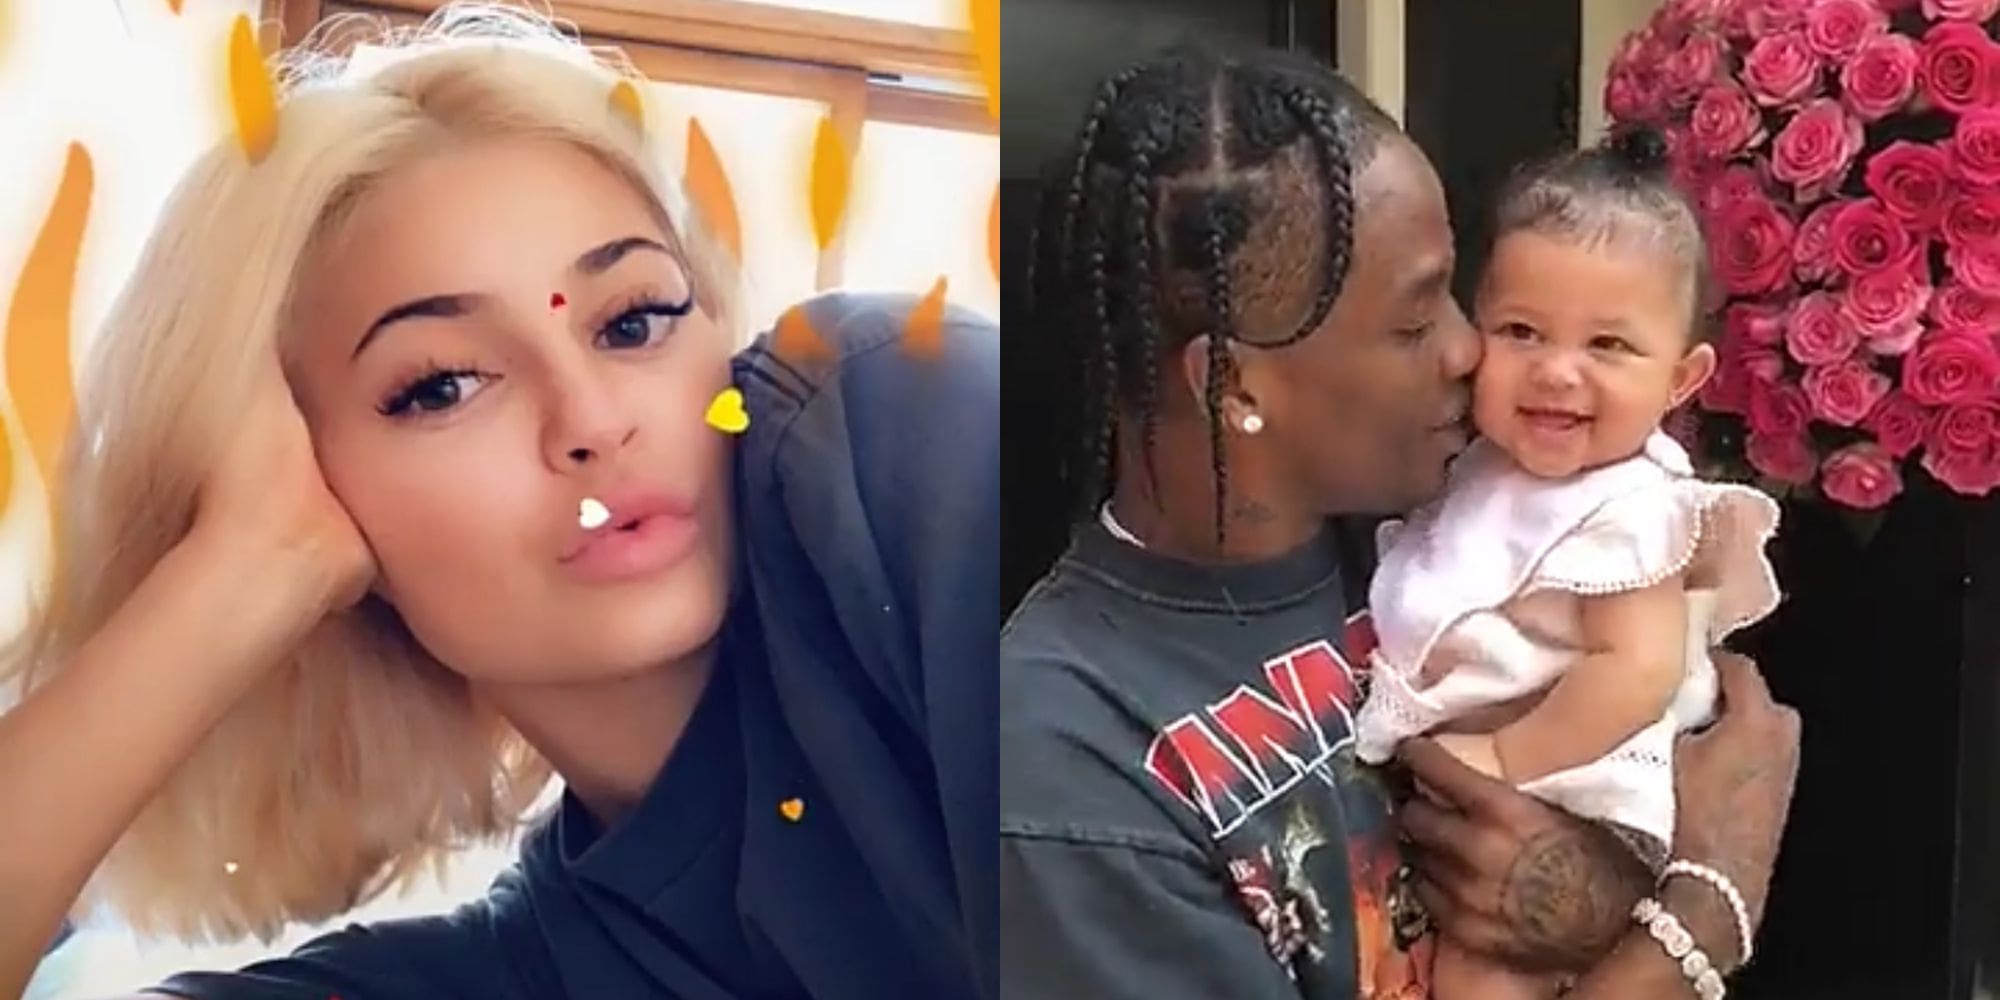 Kylie Jenner's Daughter, Stormi Webster Rocks Her Dad's Merch - Check Out Her Fashion Game